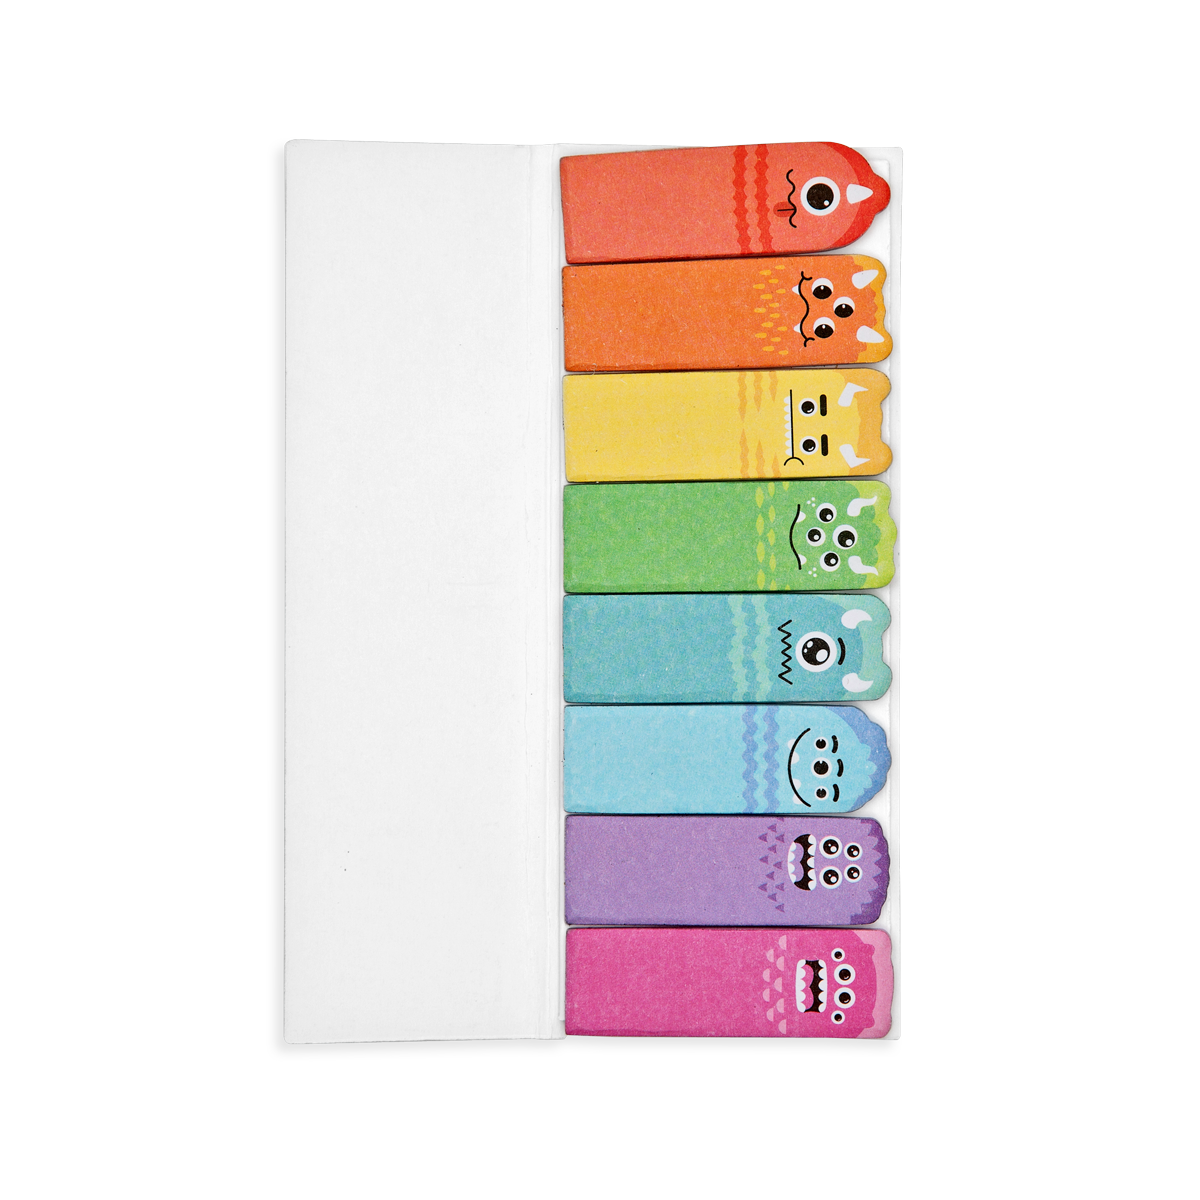 OOLY Note Lil' Juicy Pals Sticky Tabs